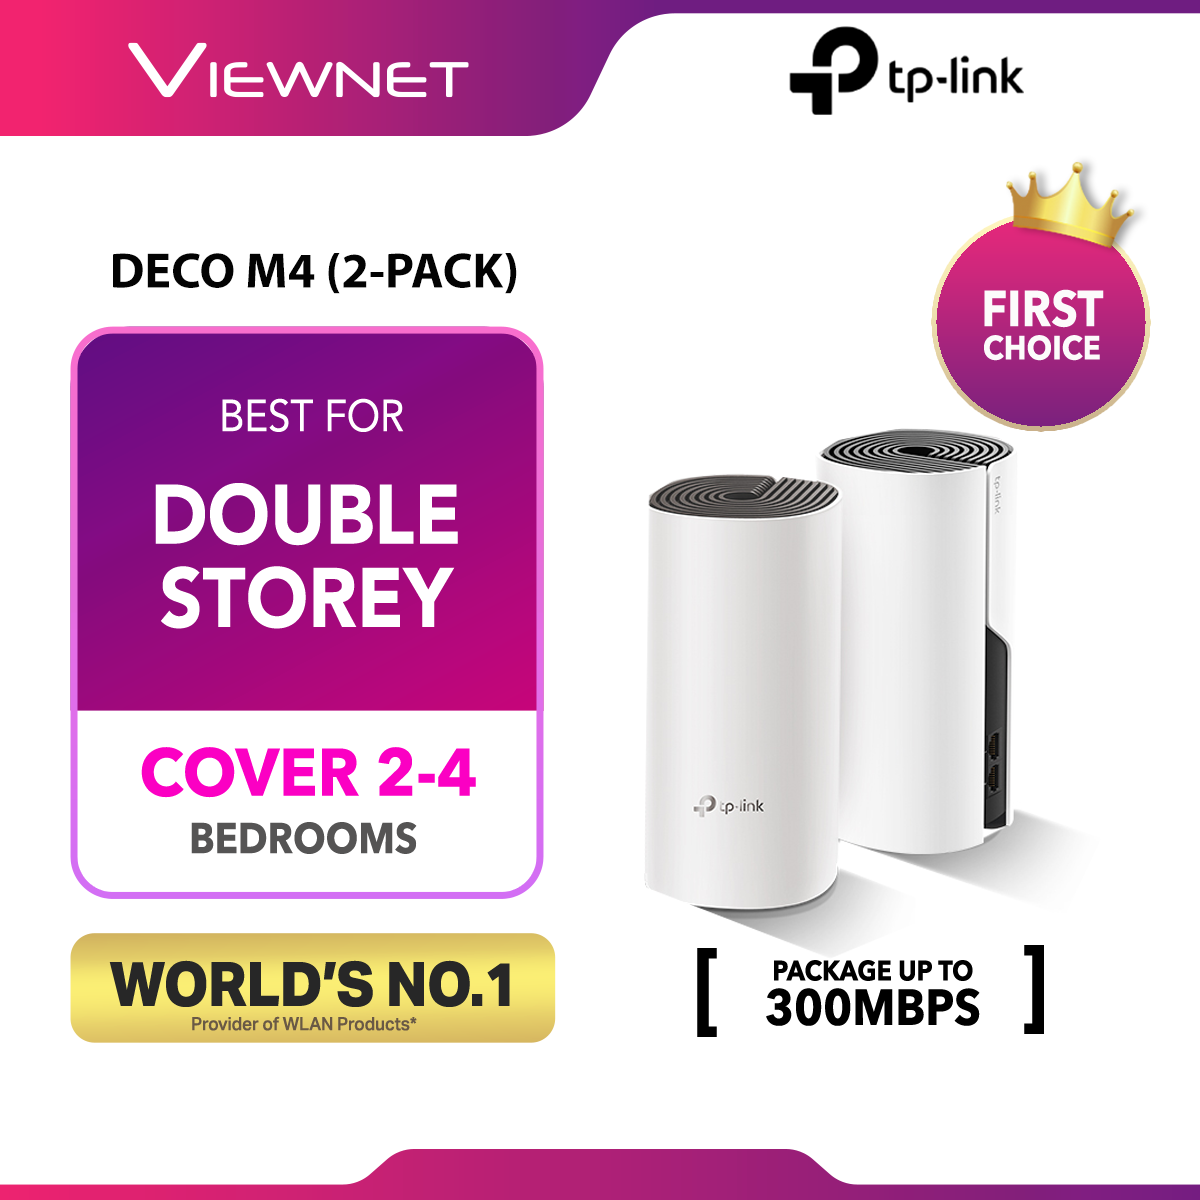 TP-Link Deco M4/HC4 (2-Pack) - AC1200 Gigabit Whole Home Mesh WiFi Wireless Router Wi-Fi System HC4 2 PACK